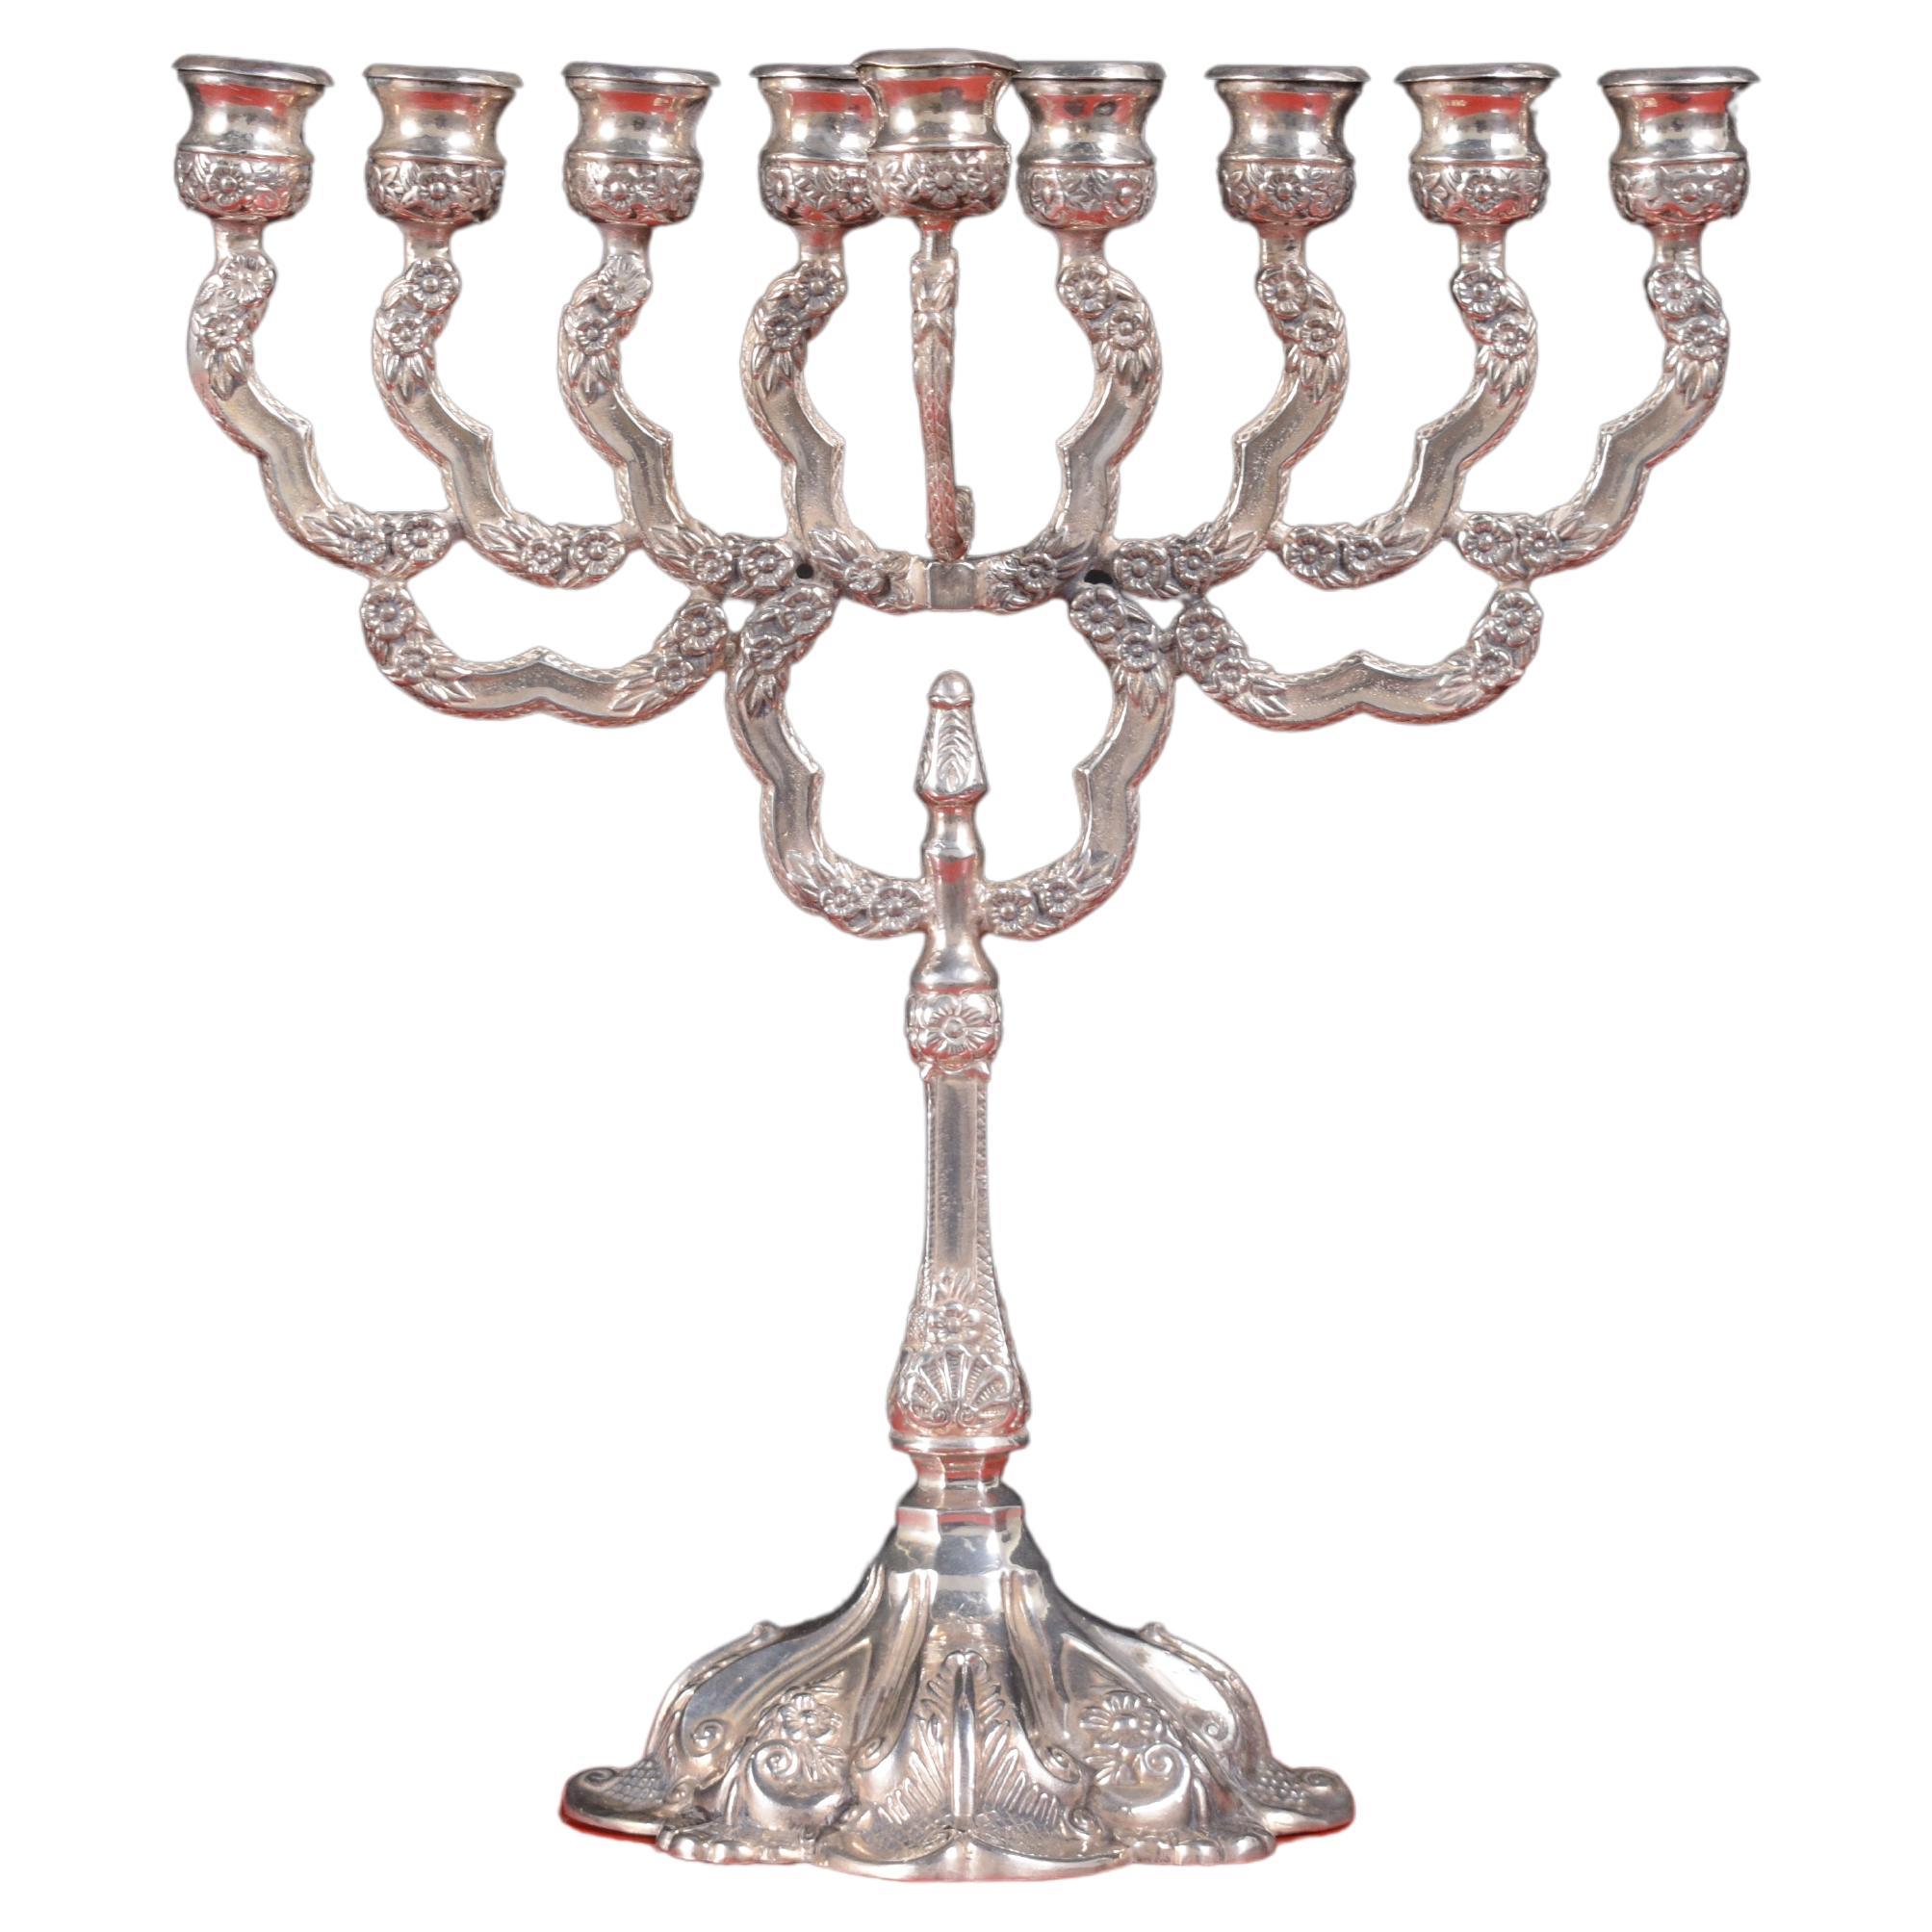 Celebrate Hanukkah with elegance and tradition with our Sterling Silver Menorah from Israel. This regal and rich-looking menorah boasts a distinguished design, featuring a square base that stands securely on four feet. The intricate detailing